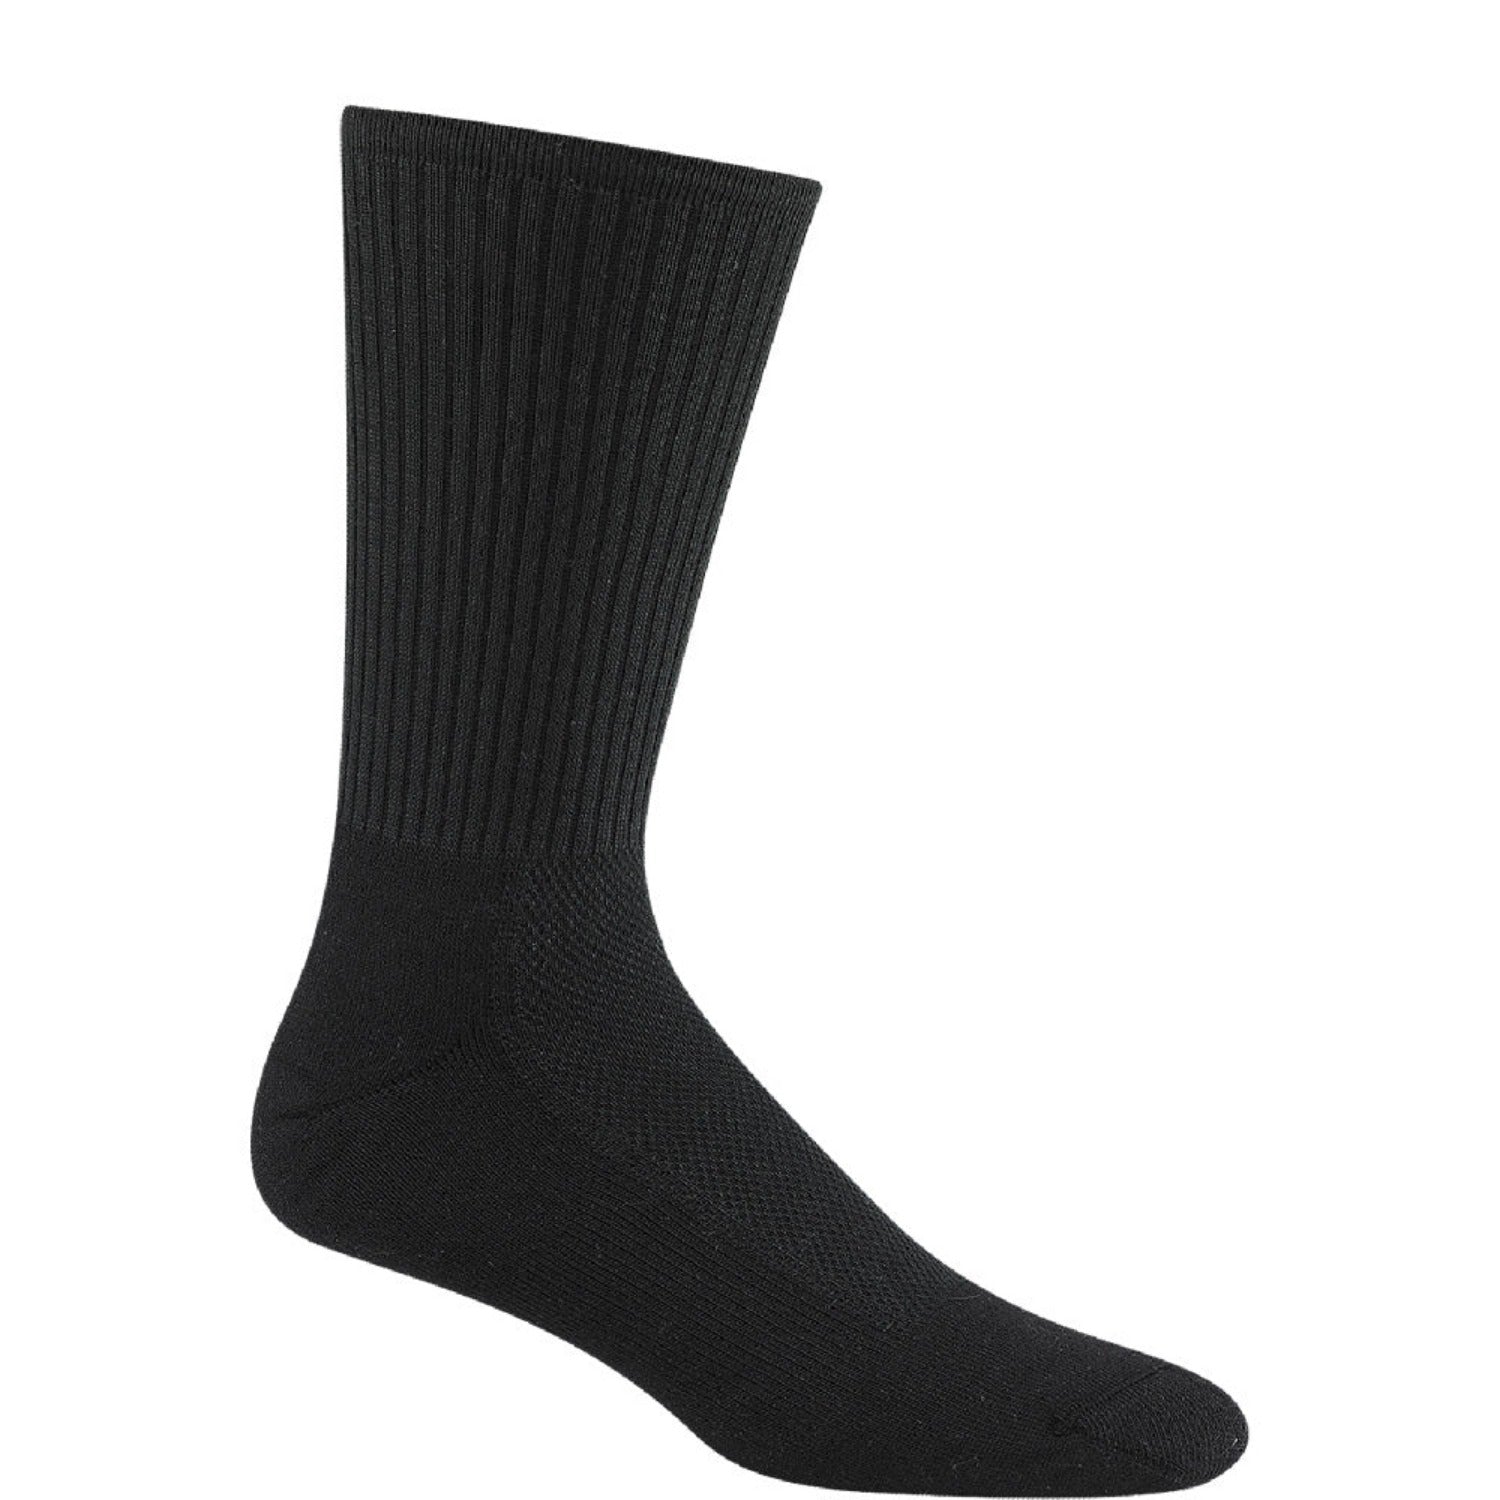 Cool-Lite Crew - Black full product perspective - made in The USA Wigwam Socks